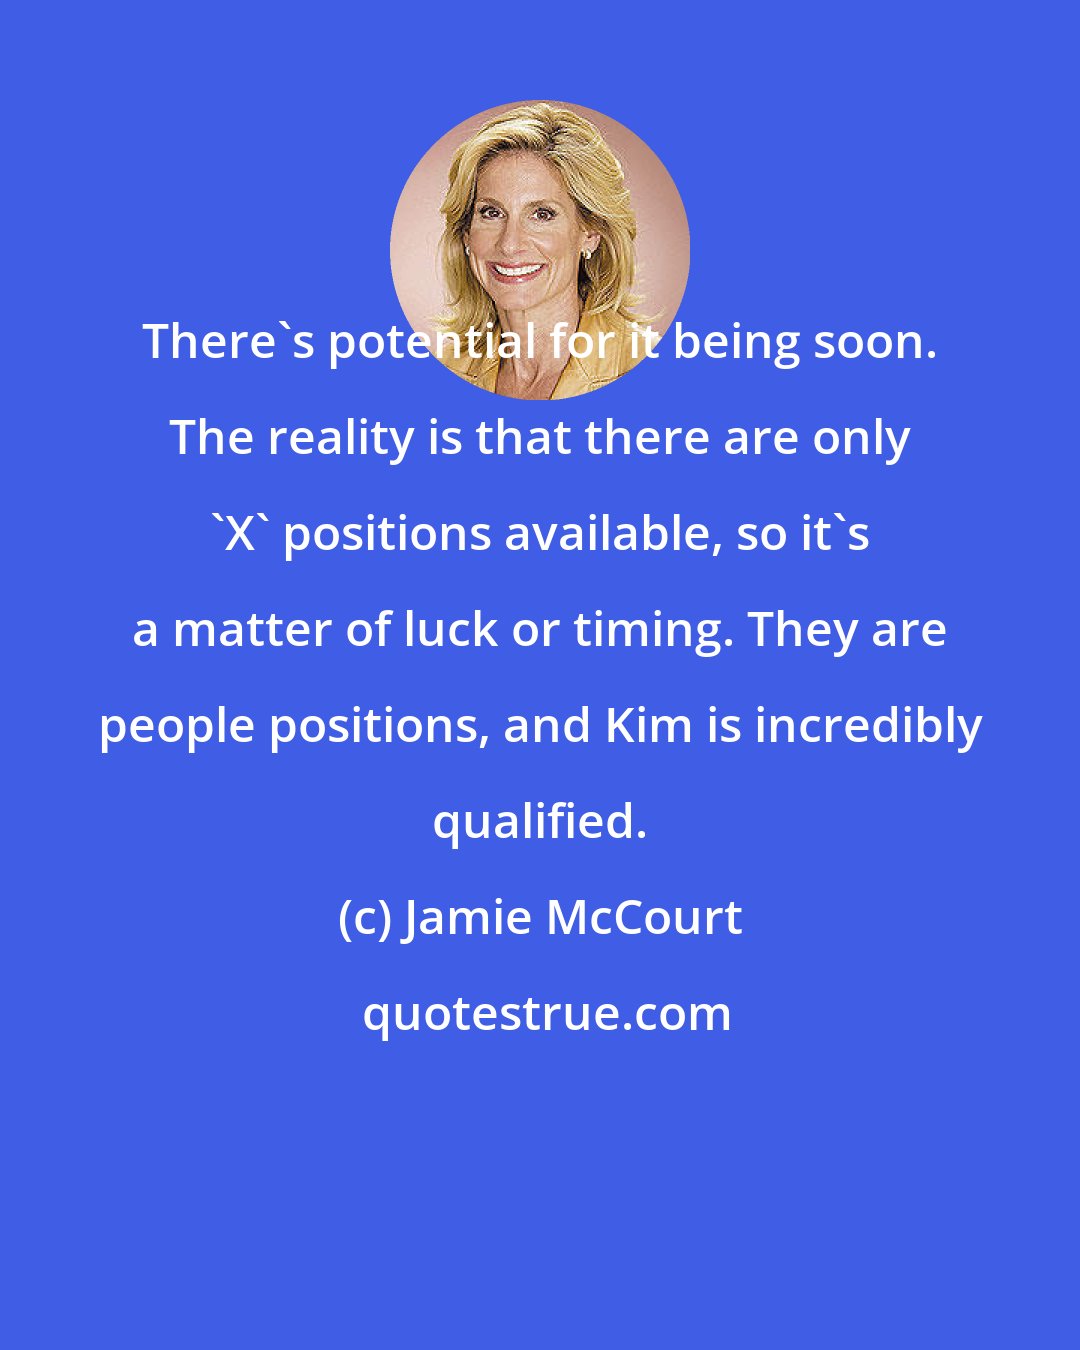 Jamie McCourt: There's potential for it being soon. The reality is that there are only 'X' positions available, so it's a matter of luck or timing. They are people positions, and Kim is incredibly qualified.